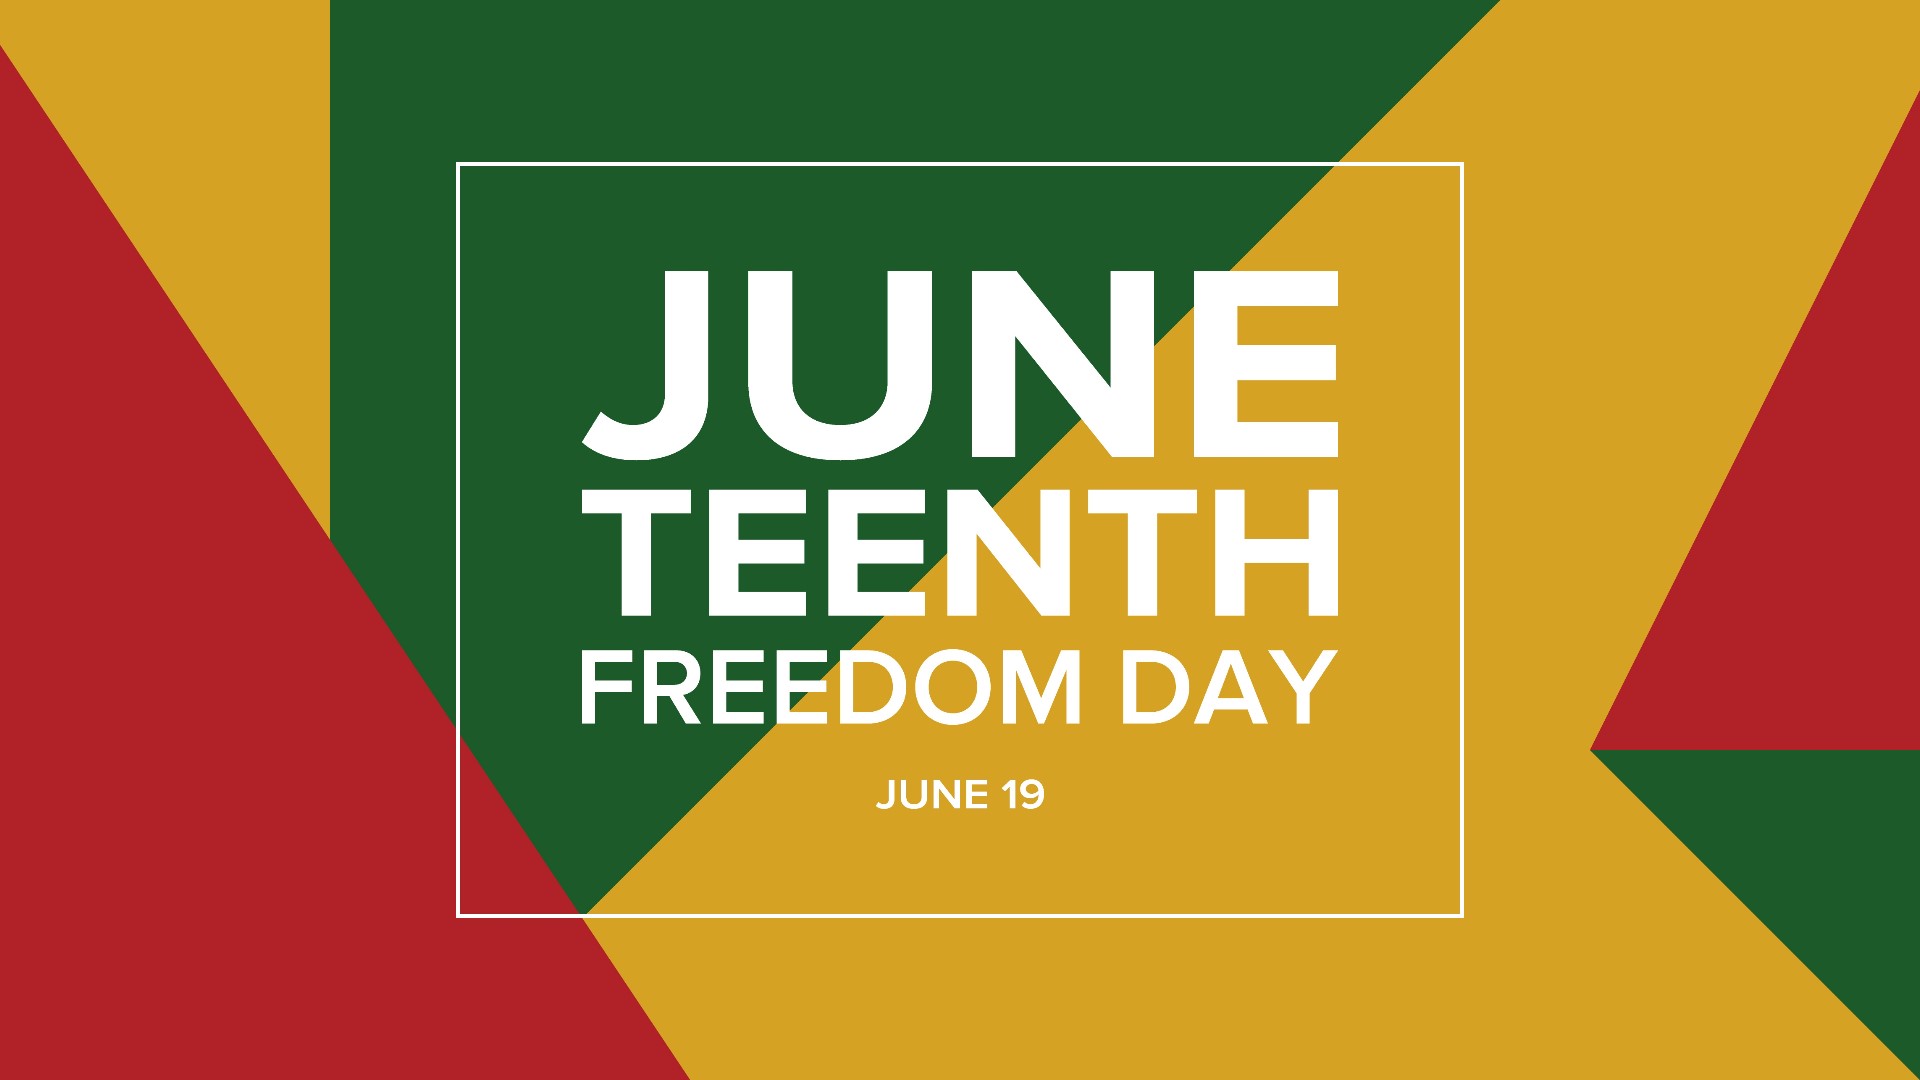 Two years after becoming an official holiday, Harrisburg will host its first official Juneteenth celebration this Saturday.